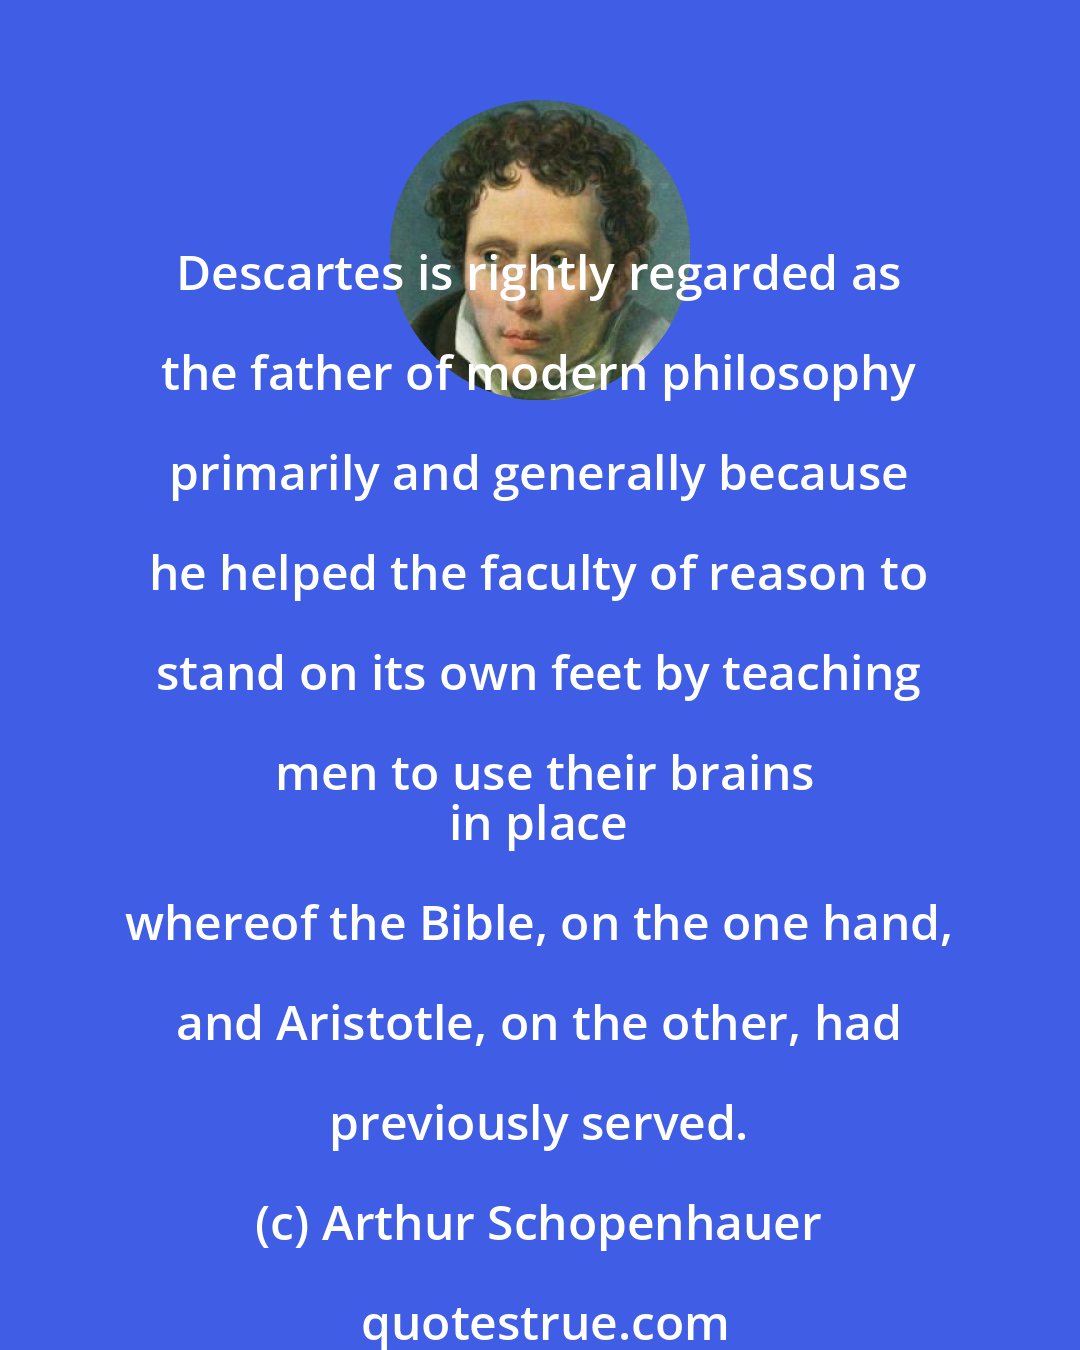 Arthur Schopenhauer: Descartes is rightly regarded as the father of modern philosophy primarily and generally because he helped the faculty of reason to stand on its own feet by teaching men to use their brains
 in place whereof the Bible, on the one hand, and Aristotle, on the other, had previously served.